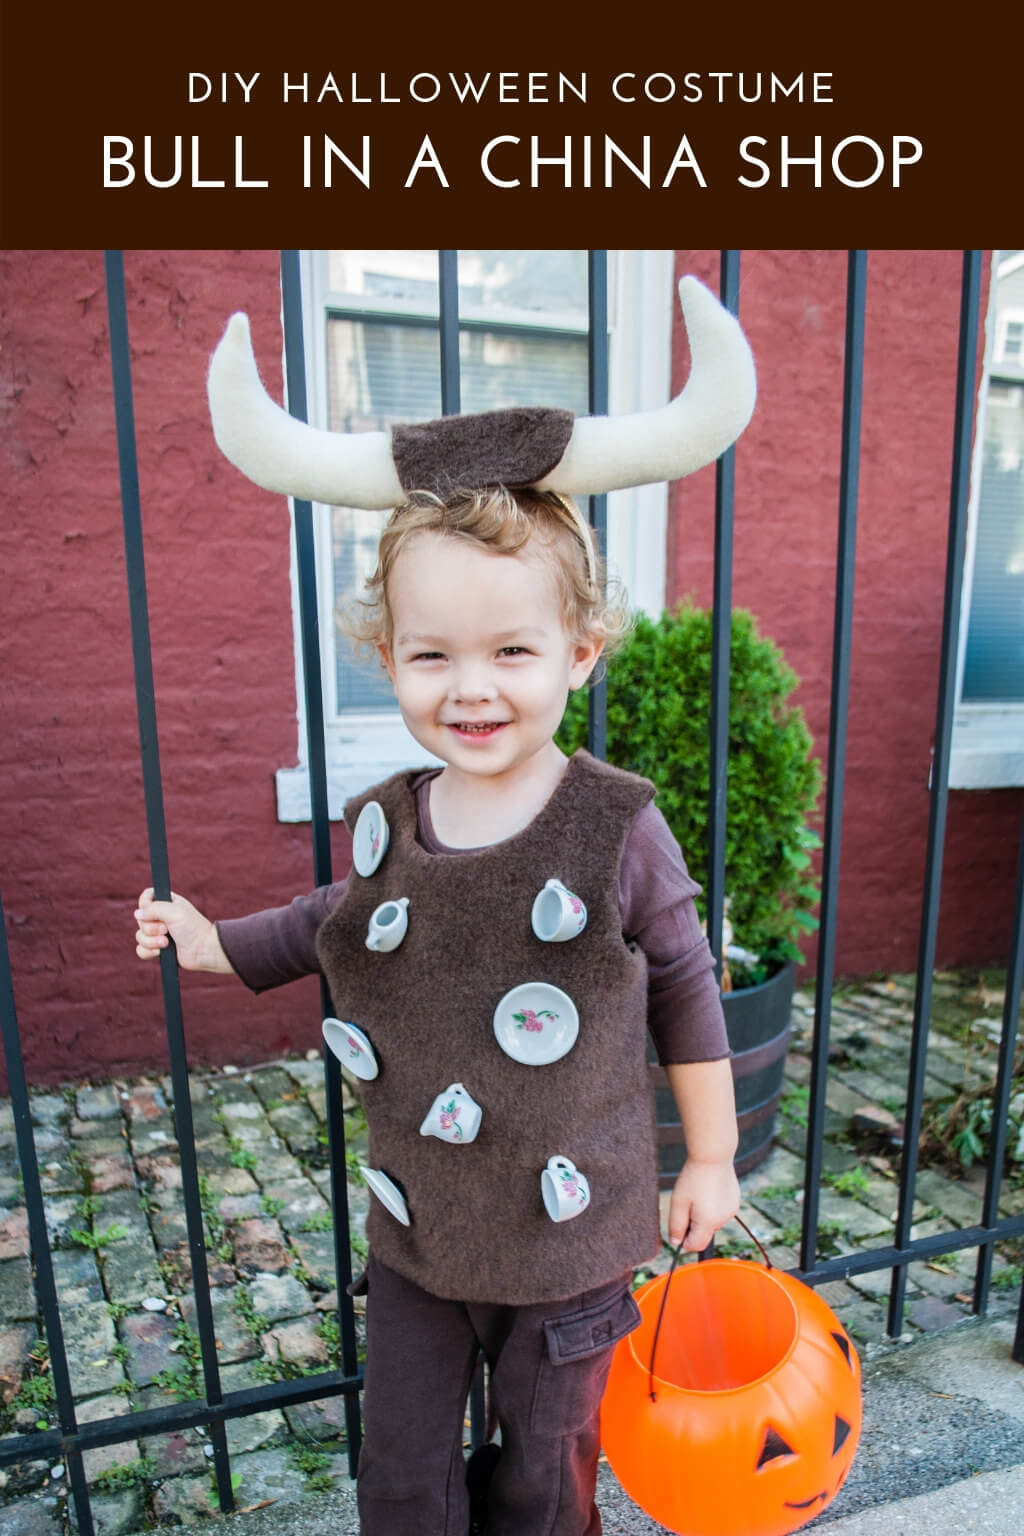 Funny Costumes DIY
 Bull In A China Shop DIY Halloween Costume for Toddlers